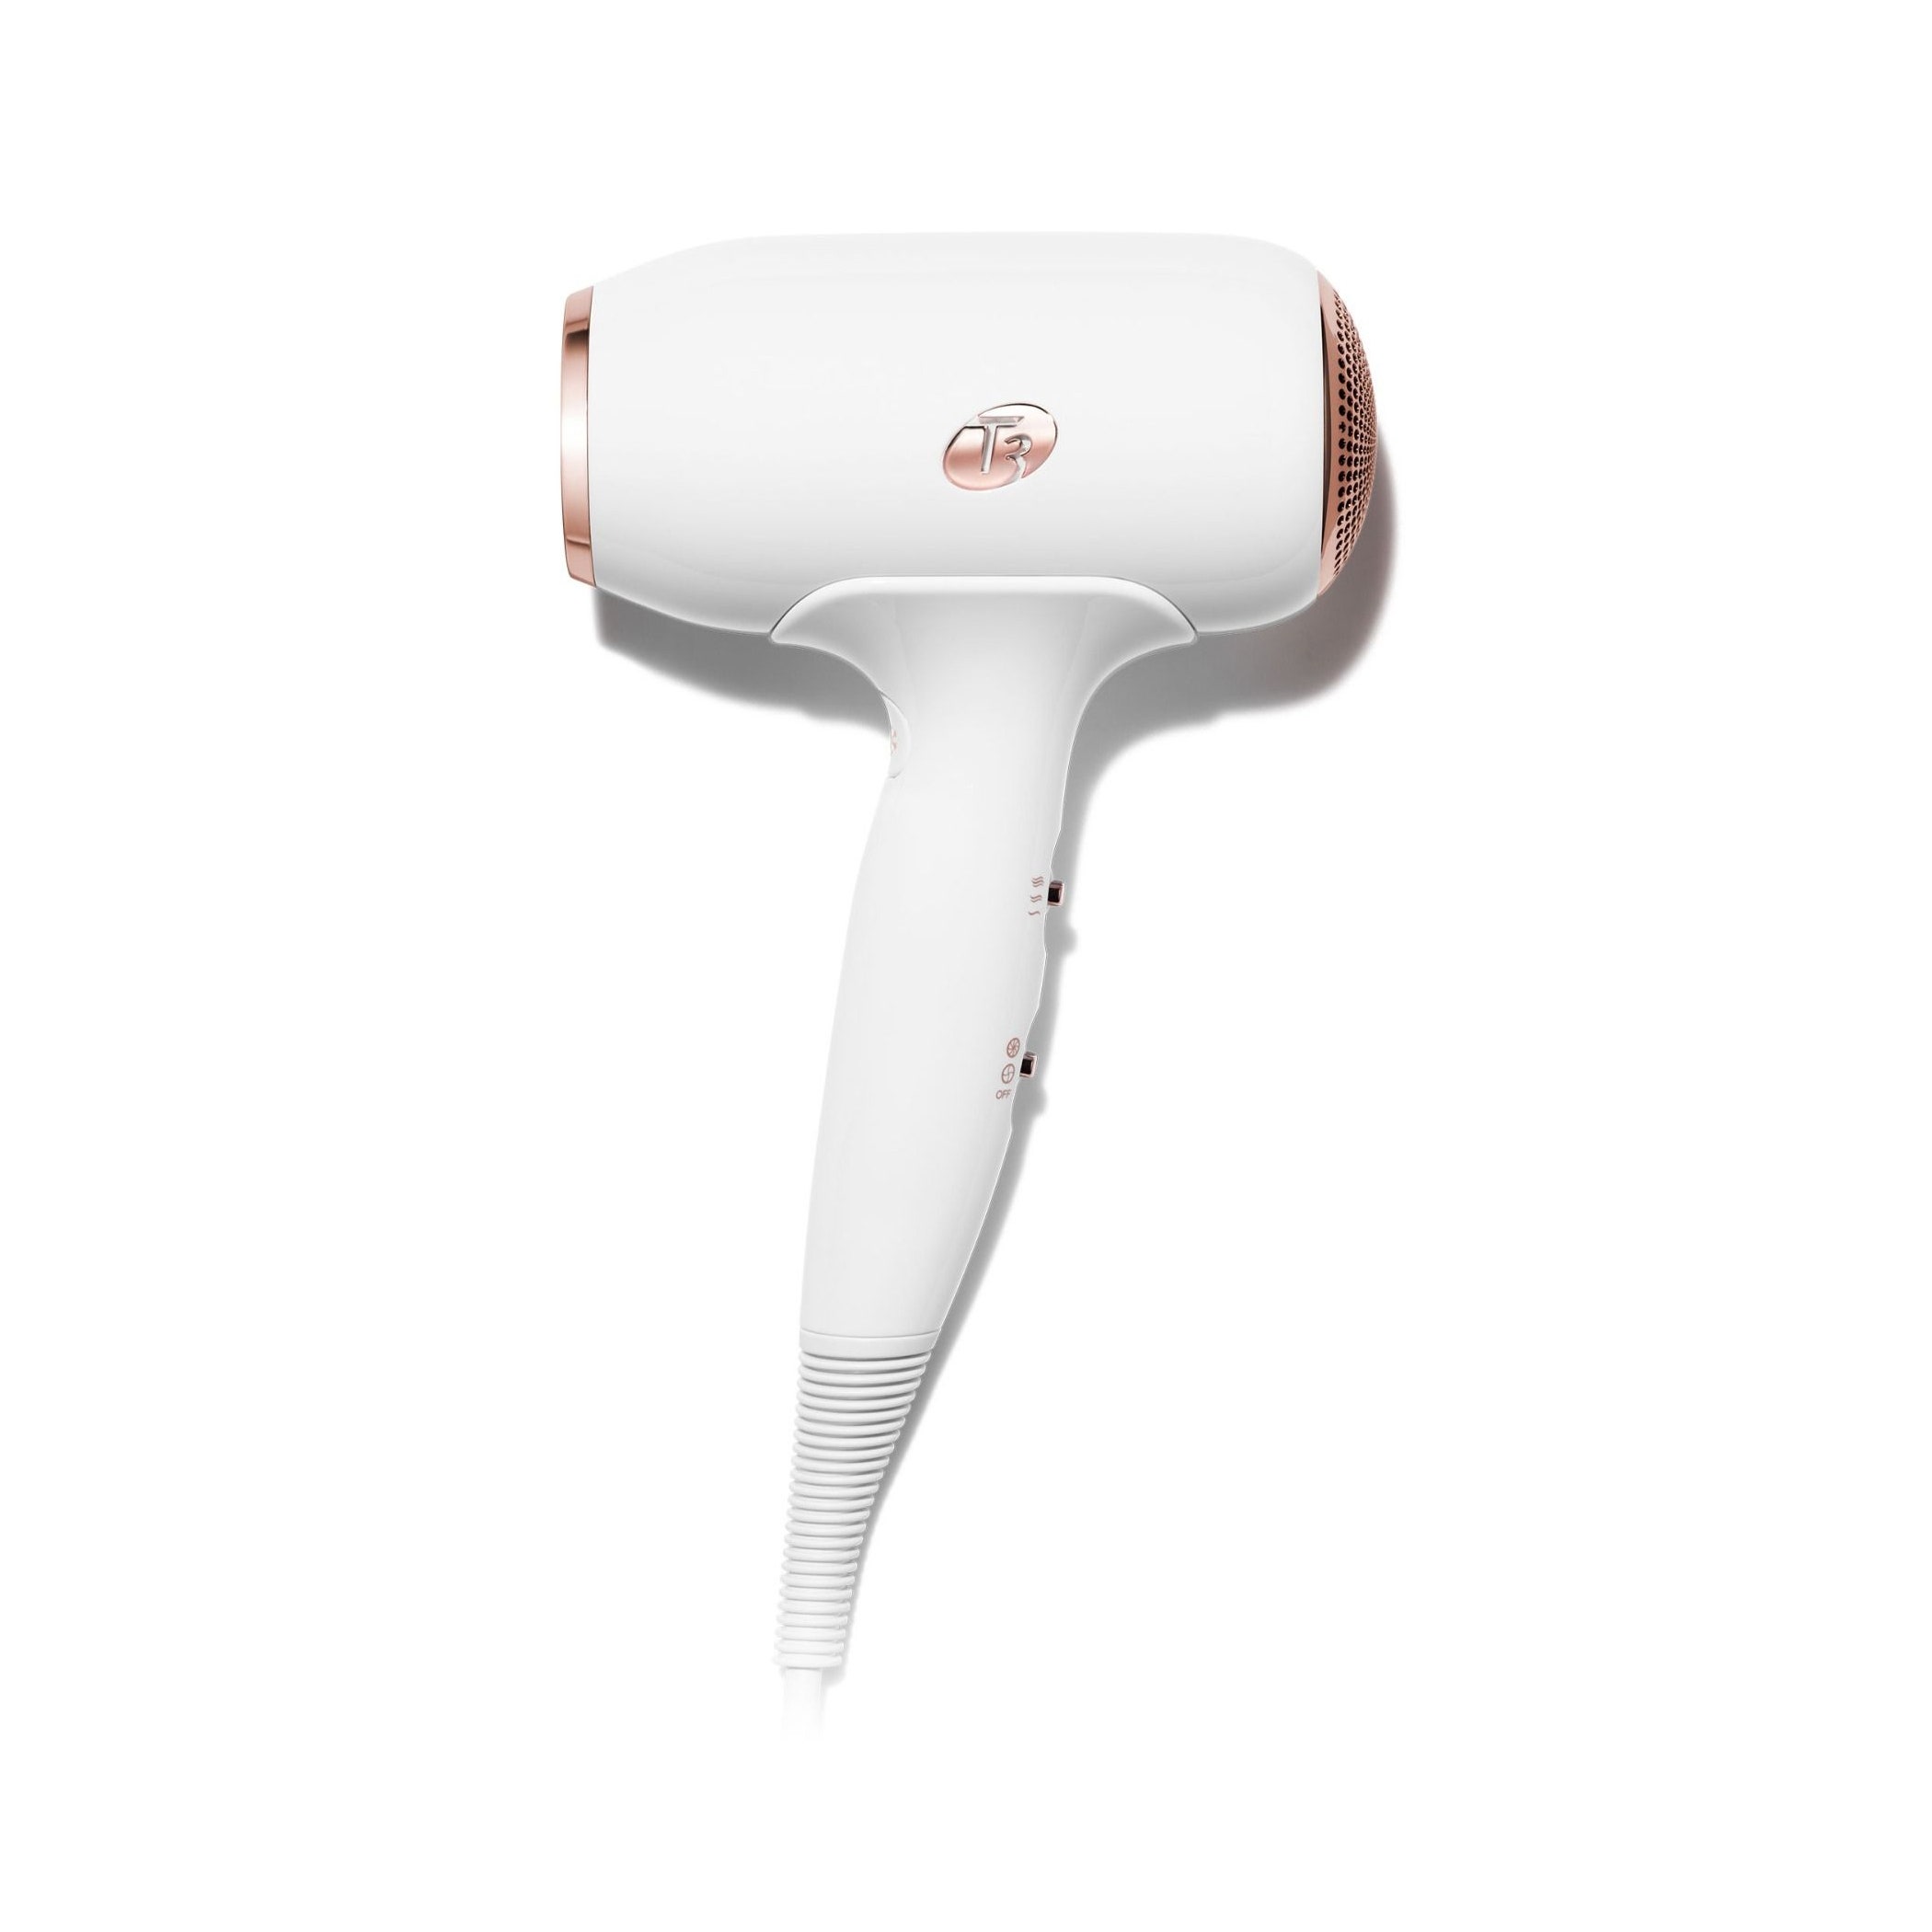 <p><strong>Why It's Worth It:</strong> There are smart hair dryers, and then there's this small but mighty powerhouse. The T3 Fit Dryer is compact, but the air intensity it pumps out can be attributed to T3's IonAir technology, which has three heat and two speed settings. It infuses negative ions into an expansive but gentle airstream to help smooth the hair cuticle and make drying faster. Nai’vasha calls this "a professional game-changer."</p> <p><strong>Editor Tip:</strong> This nifty tool infuses negative ions into an expansive but gentle airstream to help smooth the hair cuticle and make drying faster. Nai’vasha calls this "a professional game-changer."</p> <p><strong>Key Features:</strong> Ionic technology, three heat settings, two speed settings, traveel-friendly | <strong>Who It's For:</strong> Anyone who wants frizz-free styles during their next vacation.</p> $149, Amazon. <a href="https://www.amazon.com/T3-Micro-Compact-Dryer-Graphite/dp/B09BGMDZ51?">Get it now!</a><p>Get your daily dose of beauty tips, tricks, and product recommendations sent straight to your inbox.</p><a href="https://www.allure.com/newsletter/subscribe?sourceCode=msnsend">Sign Up Now</a>